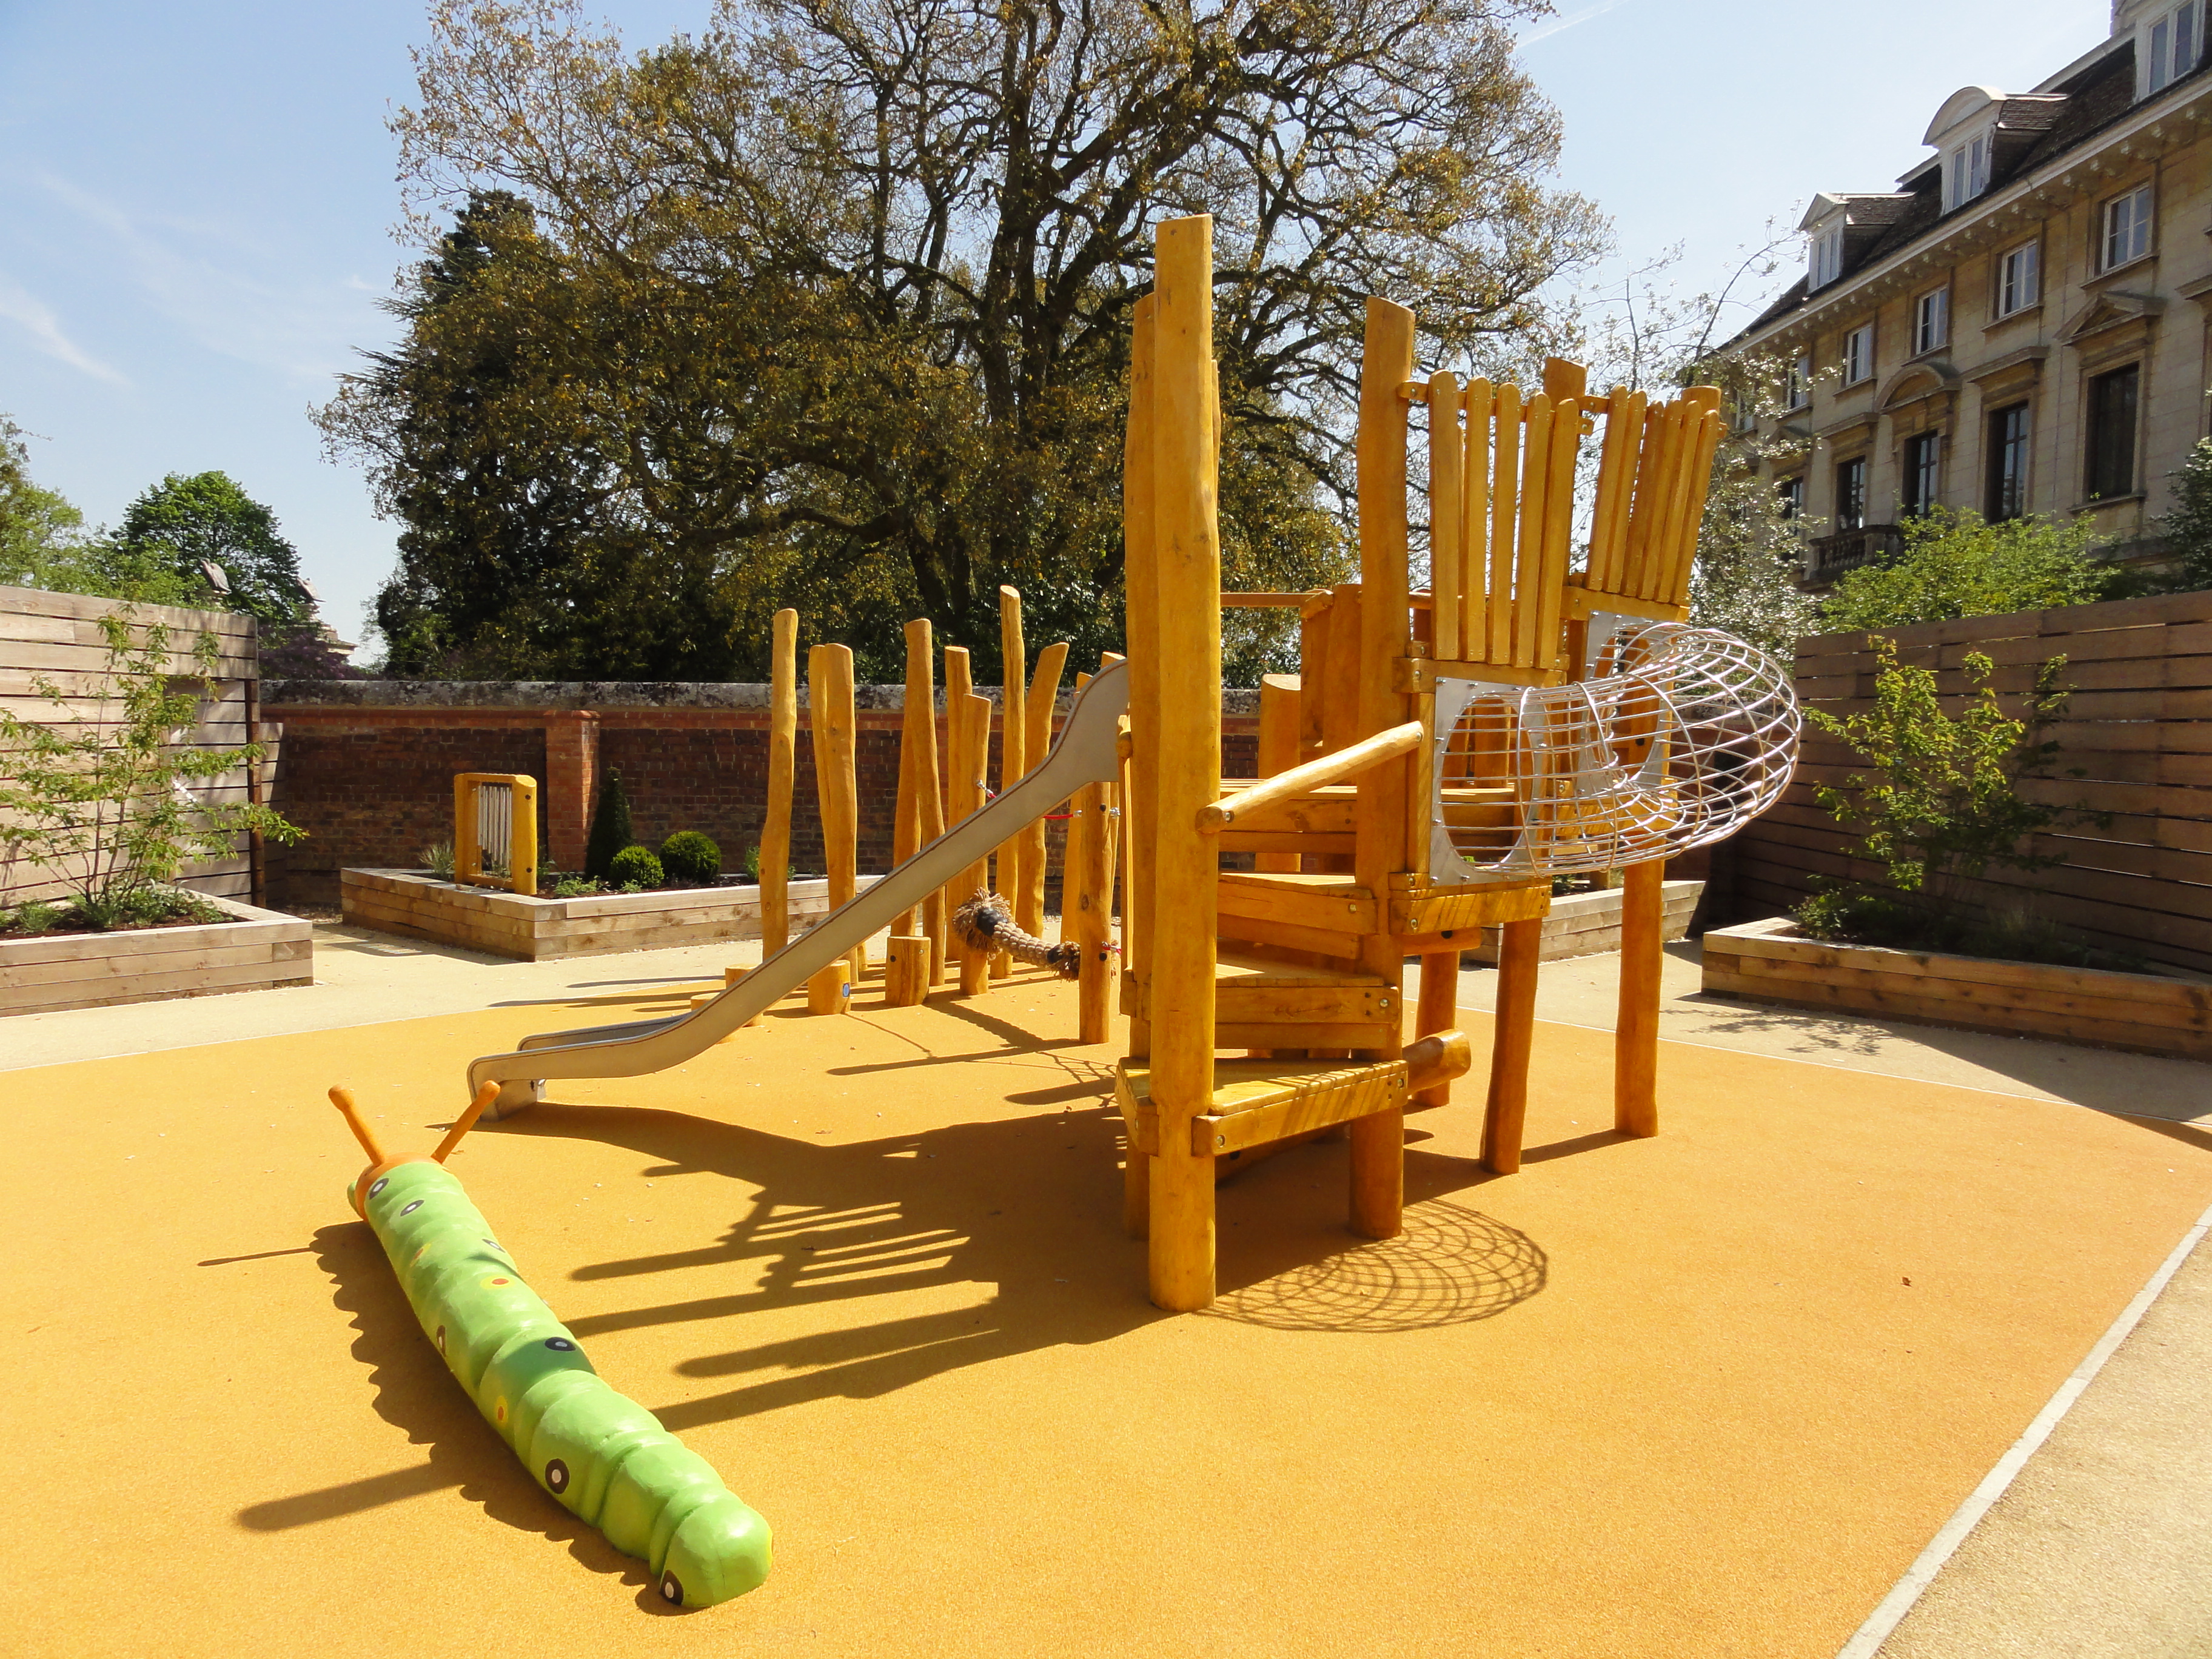 Playground by CPCL for Sue Ryder Foundation, Peterborough